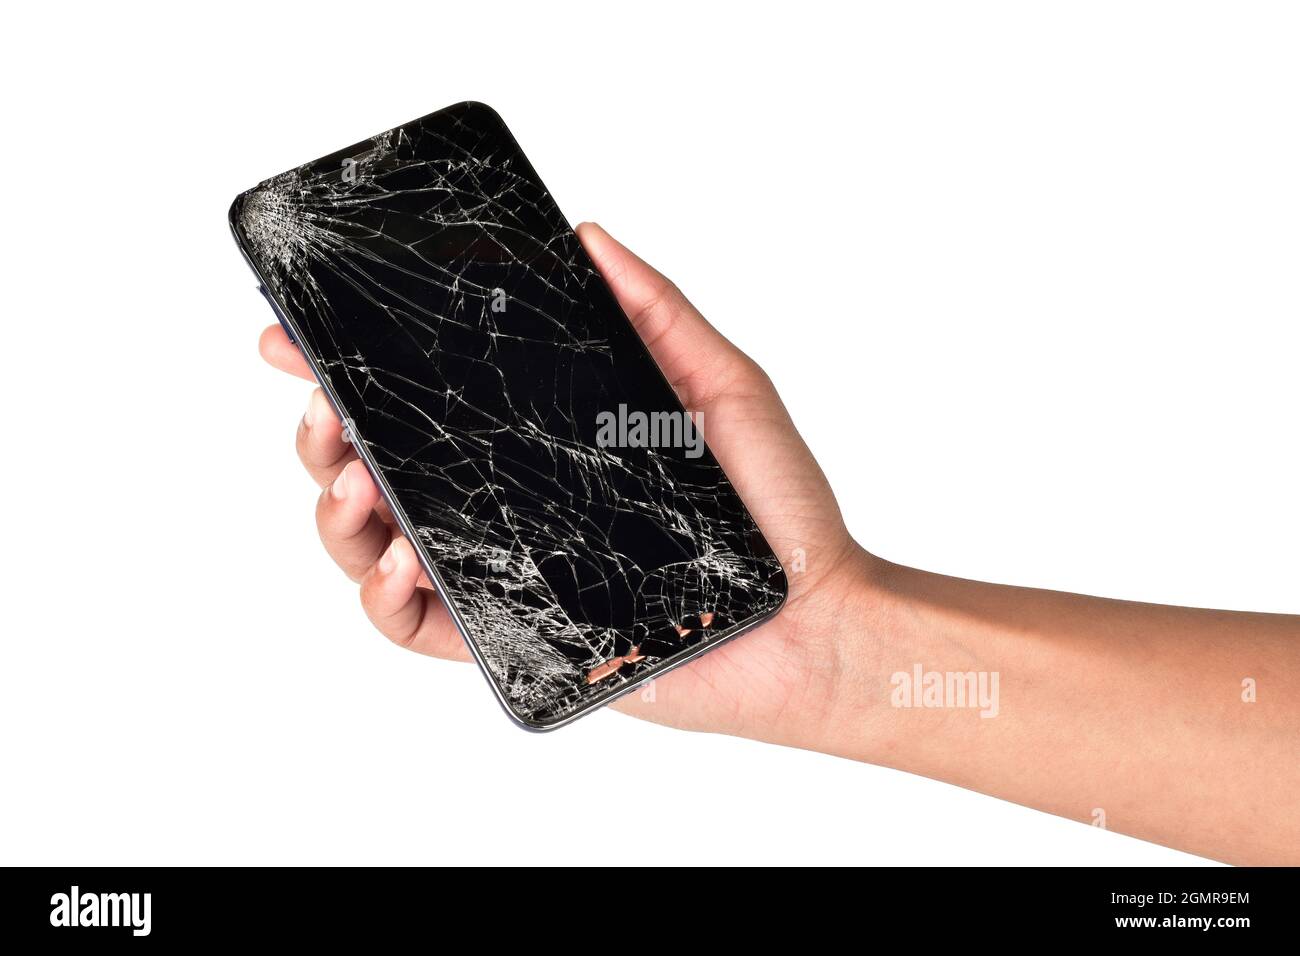 Broken smartphone in hand isolated on white background with clipping path Stock Photo